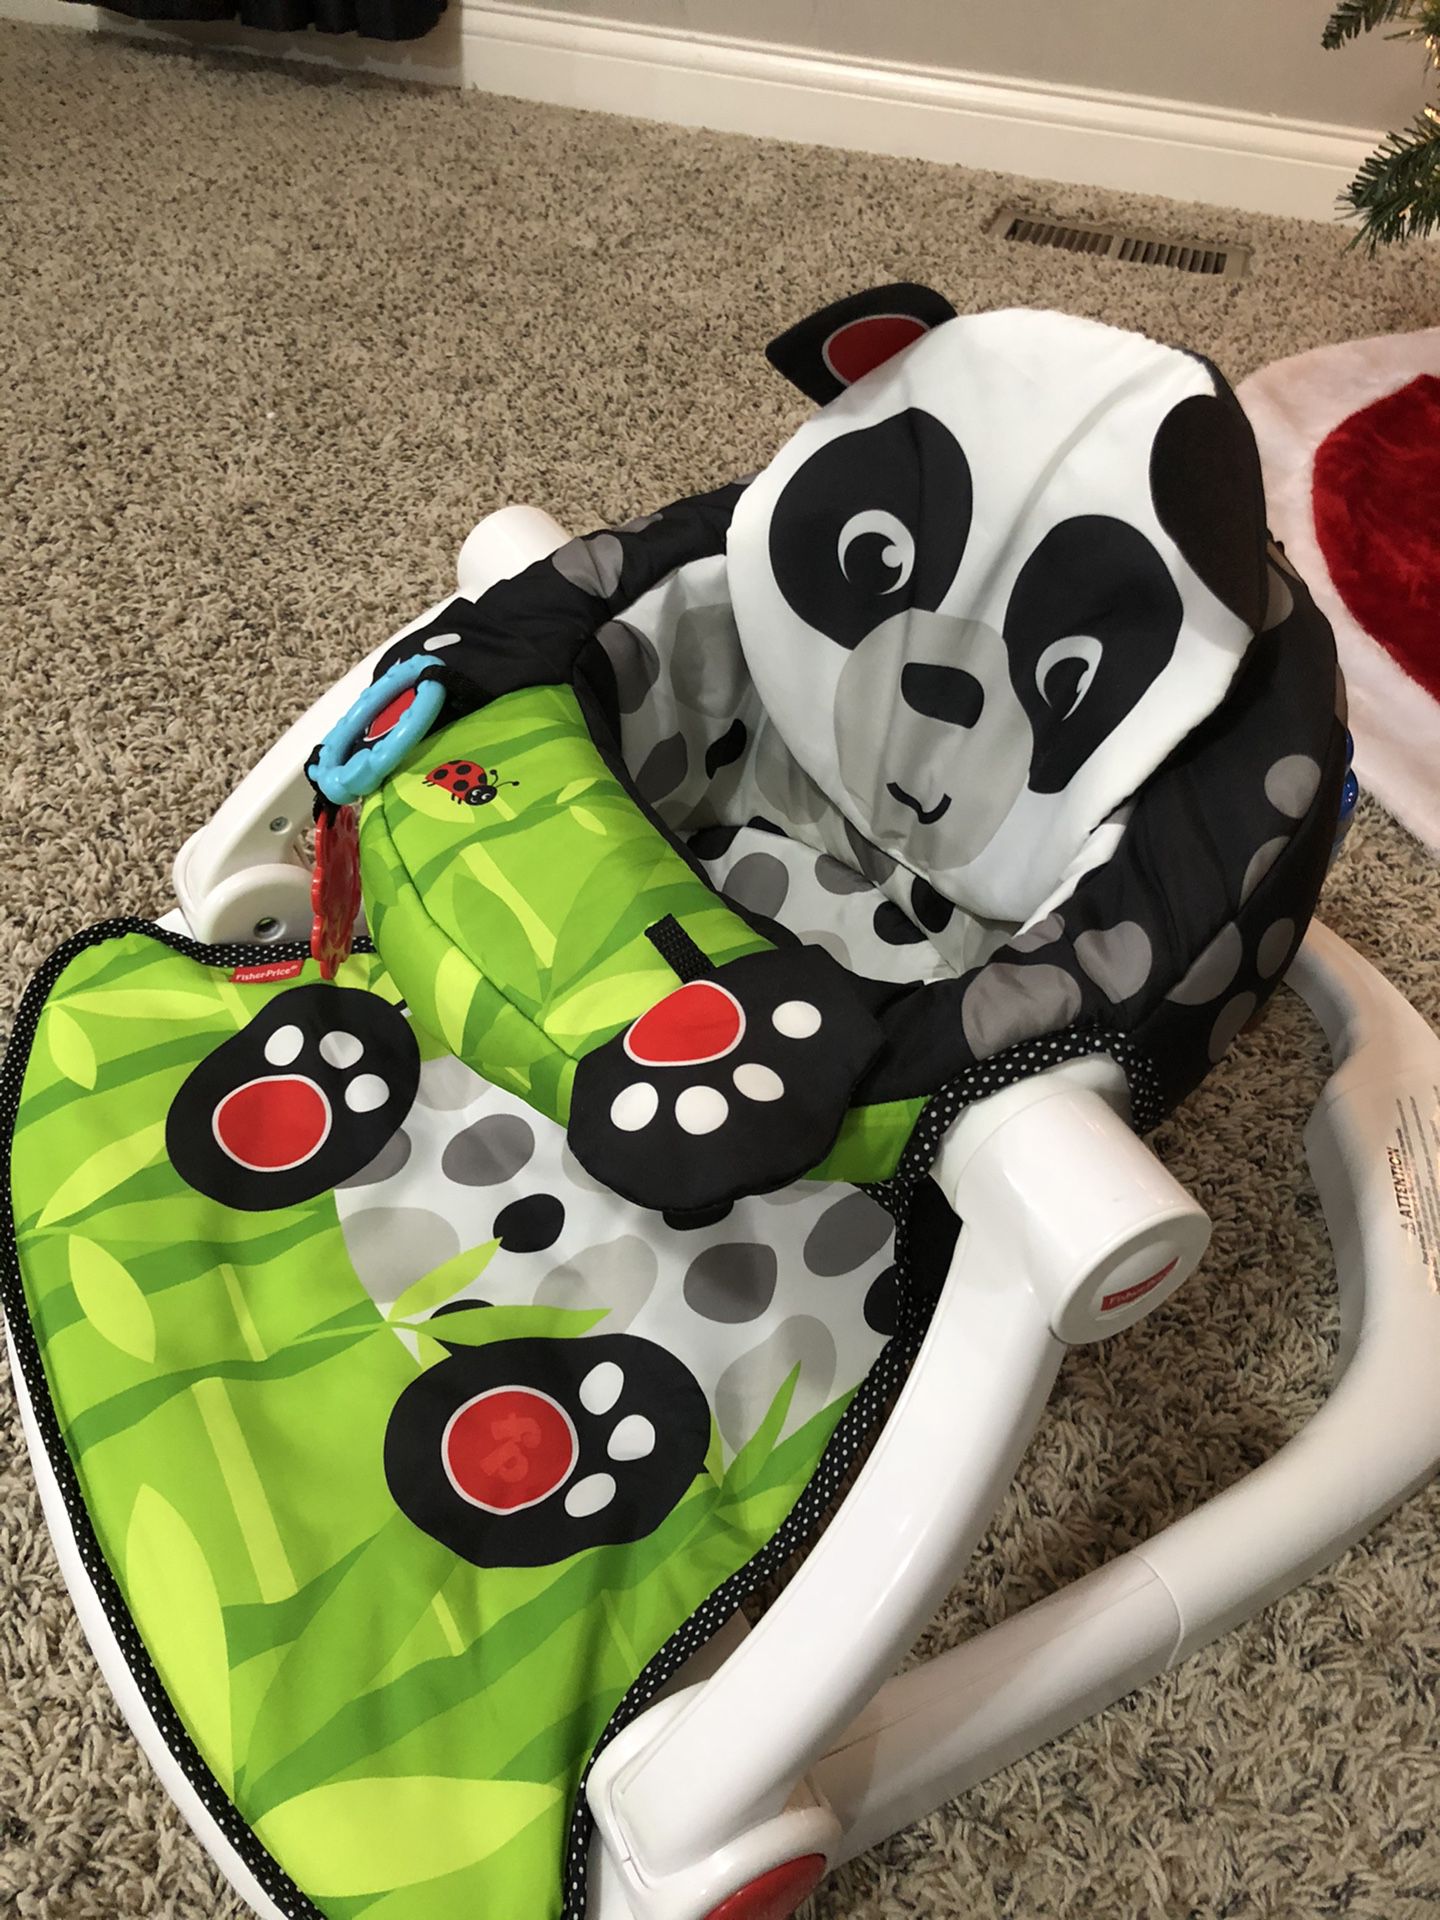 Baby’s play chair